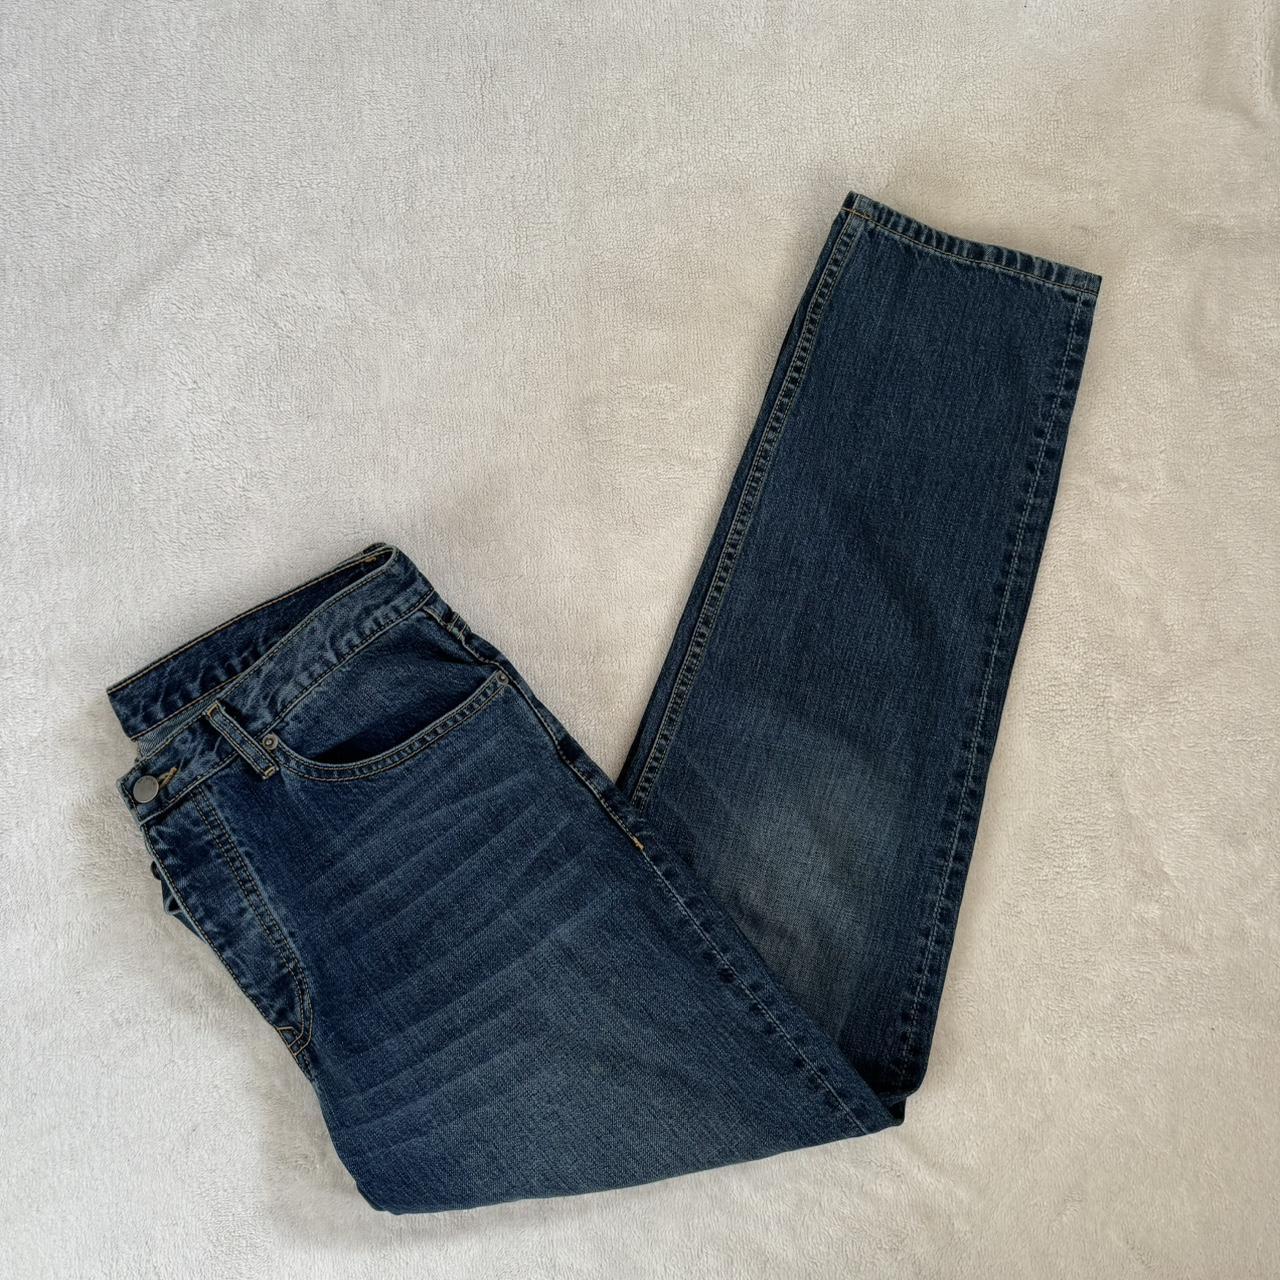 Dr. Denim Women's Navy and Blue Jeans